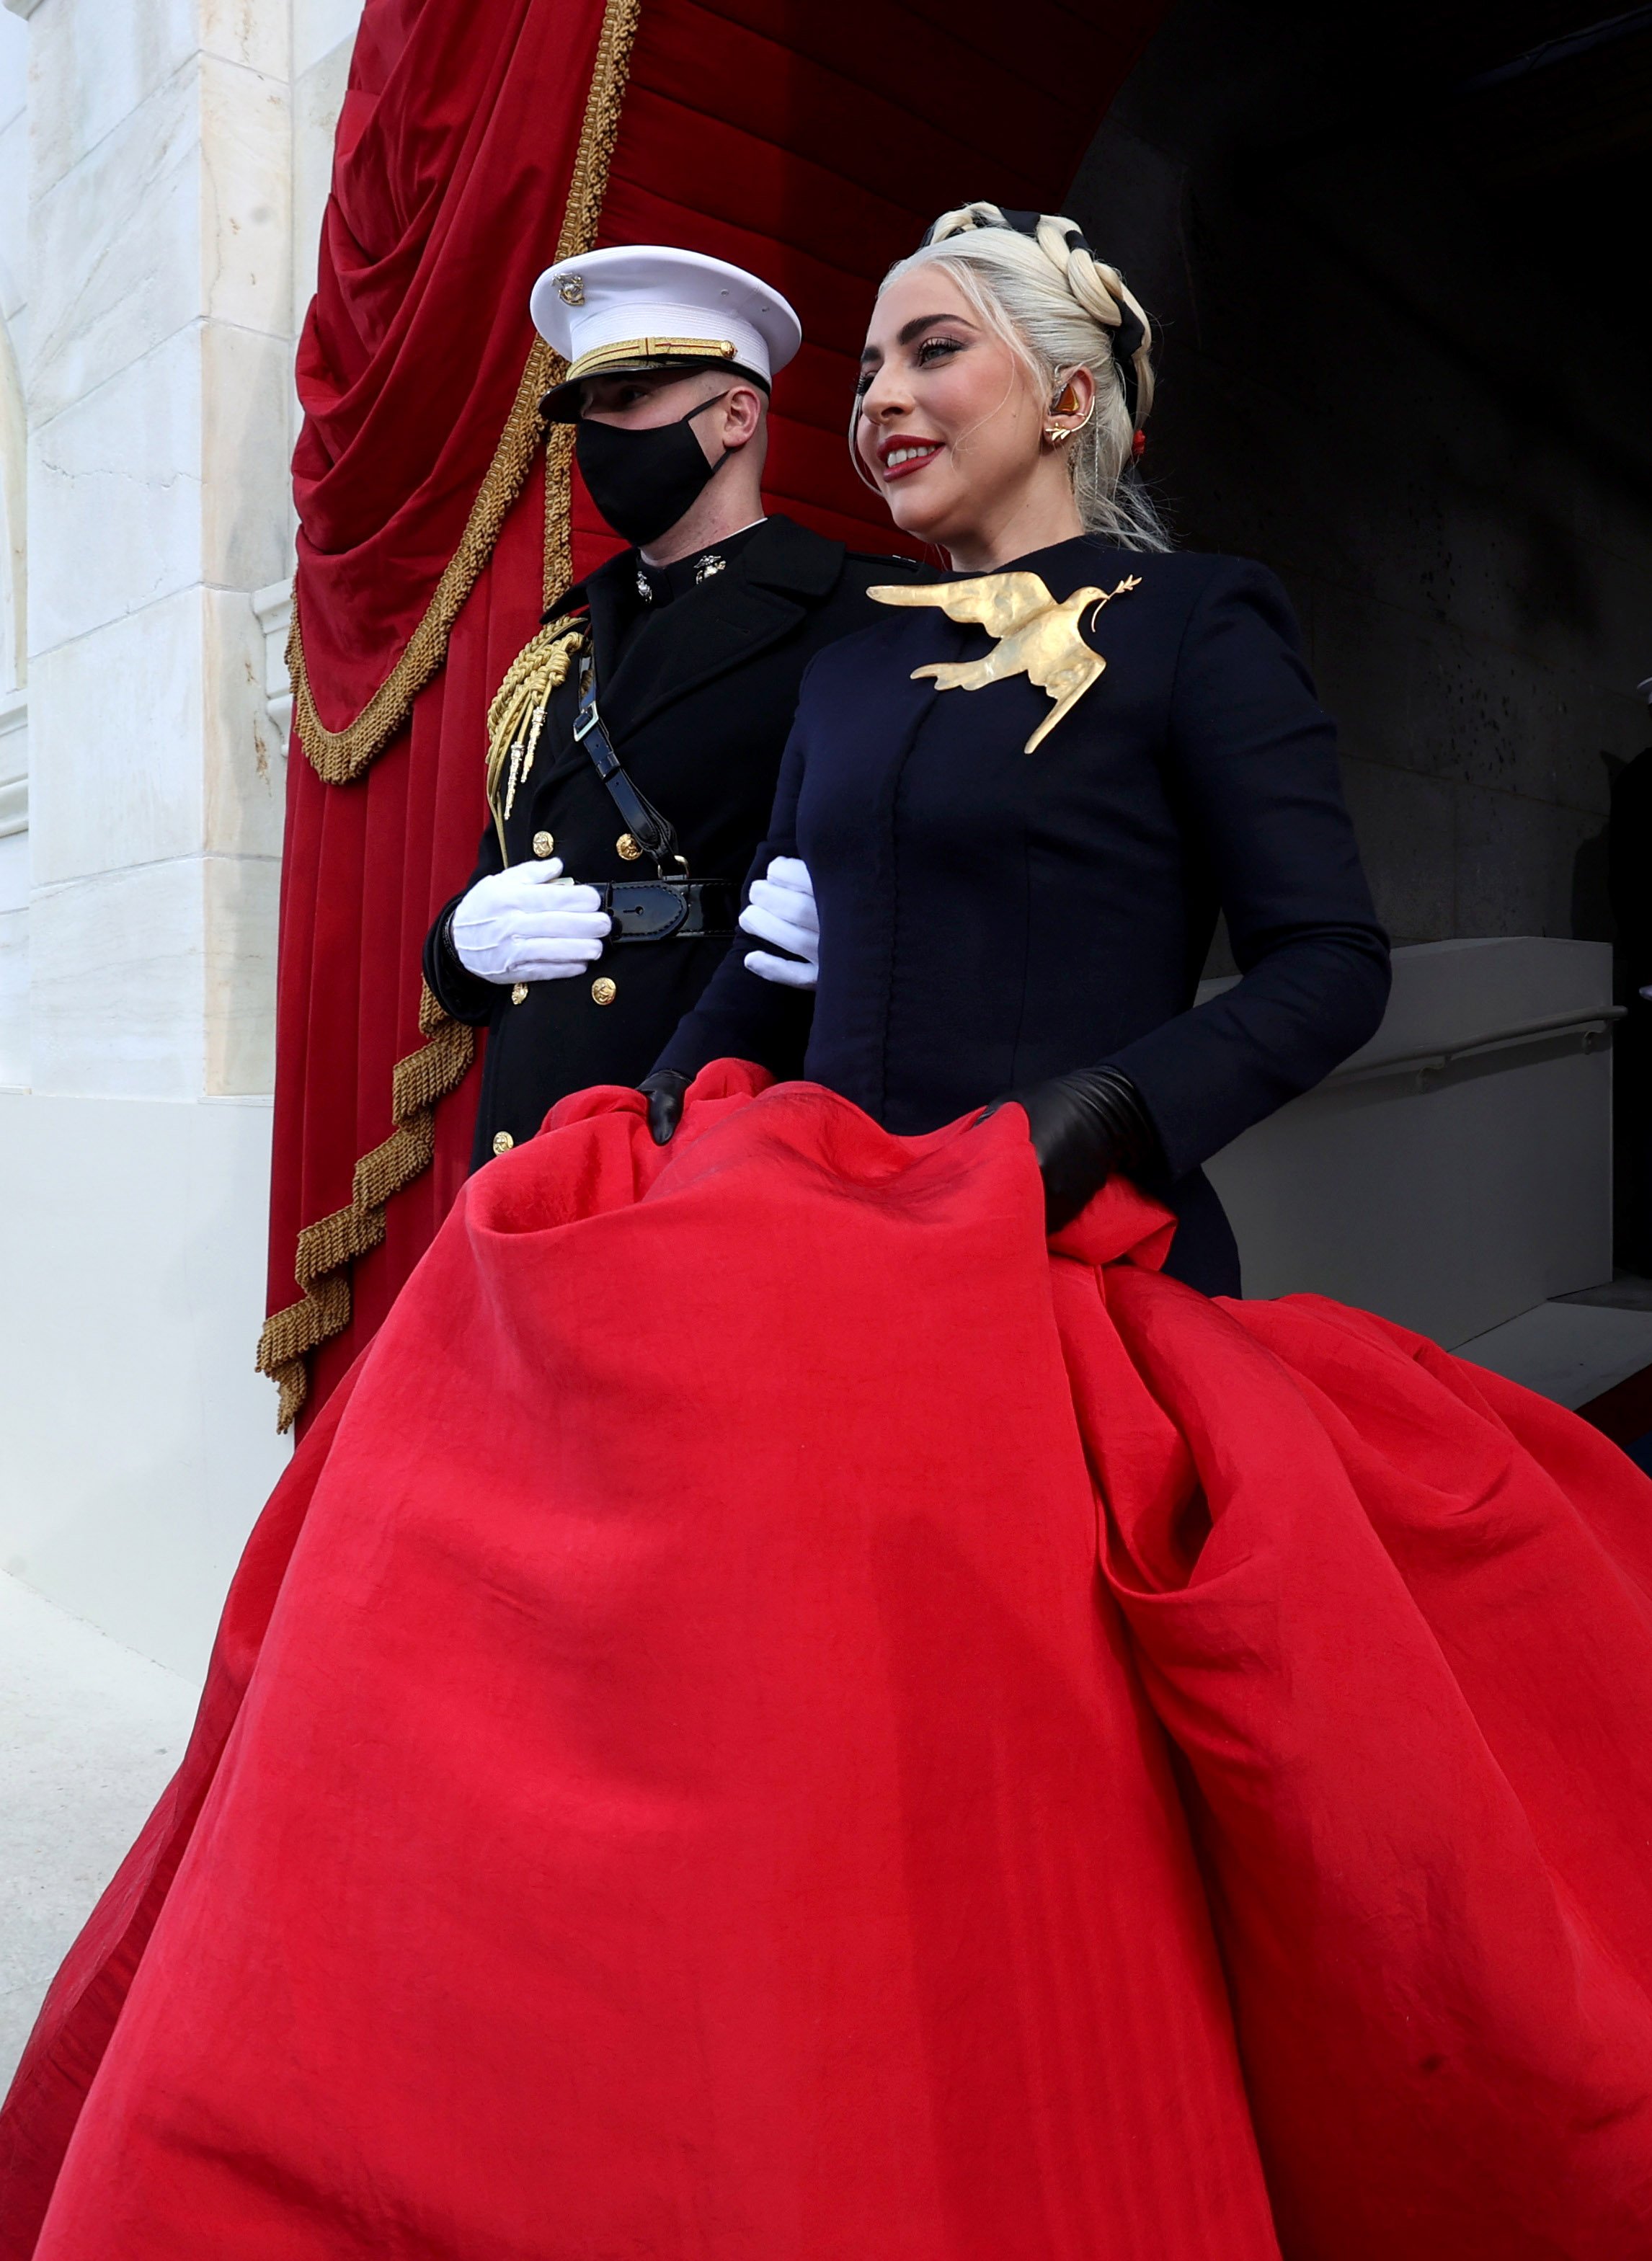 Lady Gaga arriving to give a powerful rendition of the National Anthem at the Presidential Inauguration at the capital, January, 2021. | Photo: Getty Images.